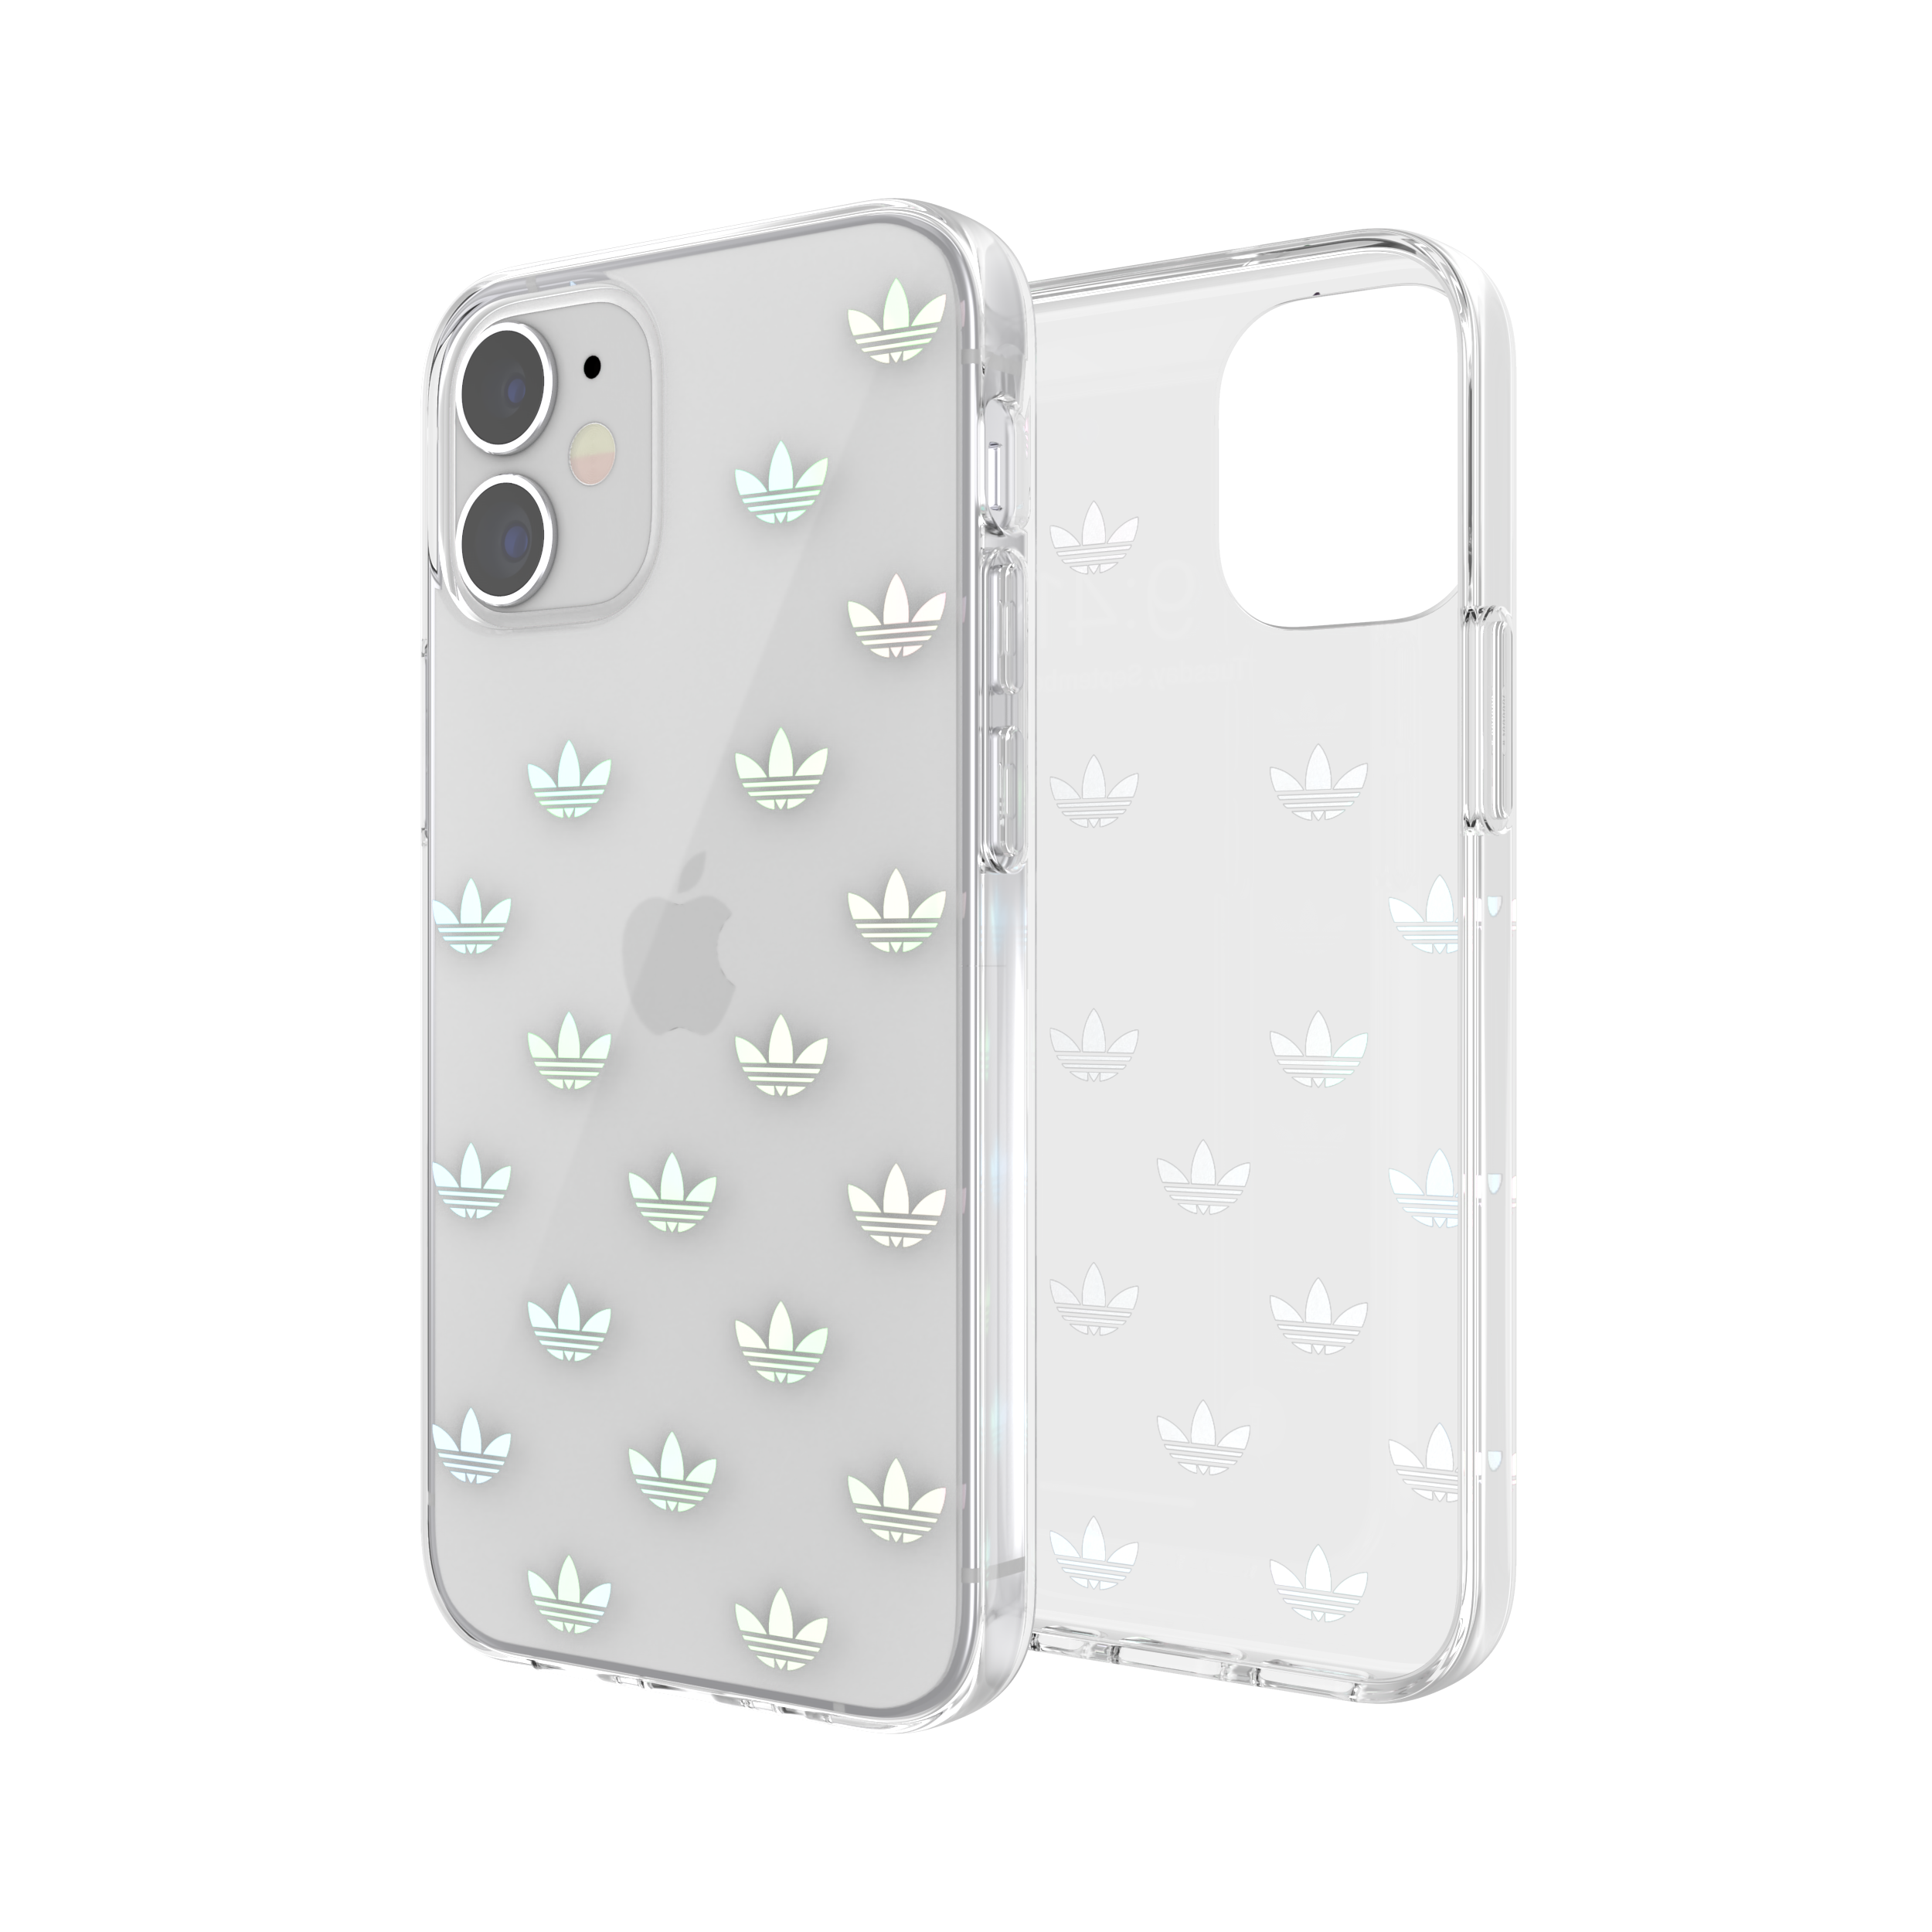 adidas SNAP Apple iPhone 12 Mini Entry Clear Case - Back cover w/ Trefoil Design, Scratch & Drop Protection w/ TPU Bumper, Wireless Charging Compatible - Holographic